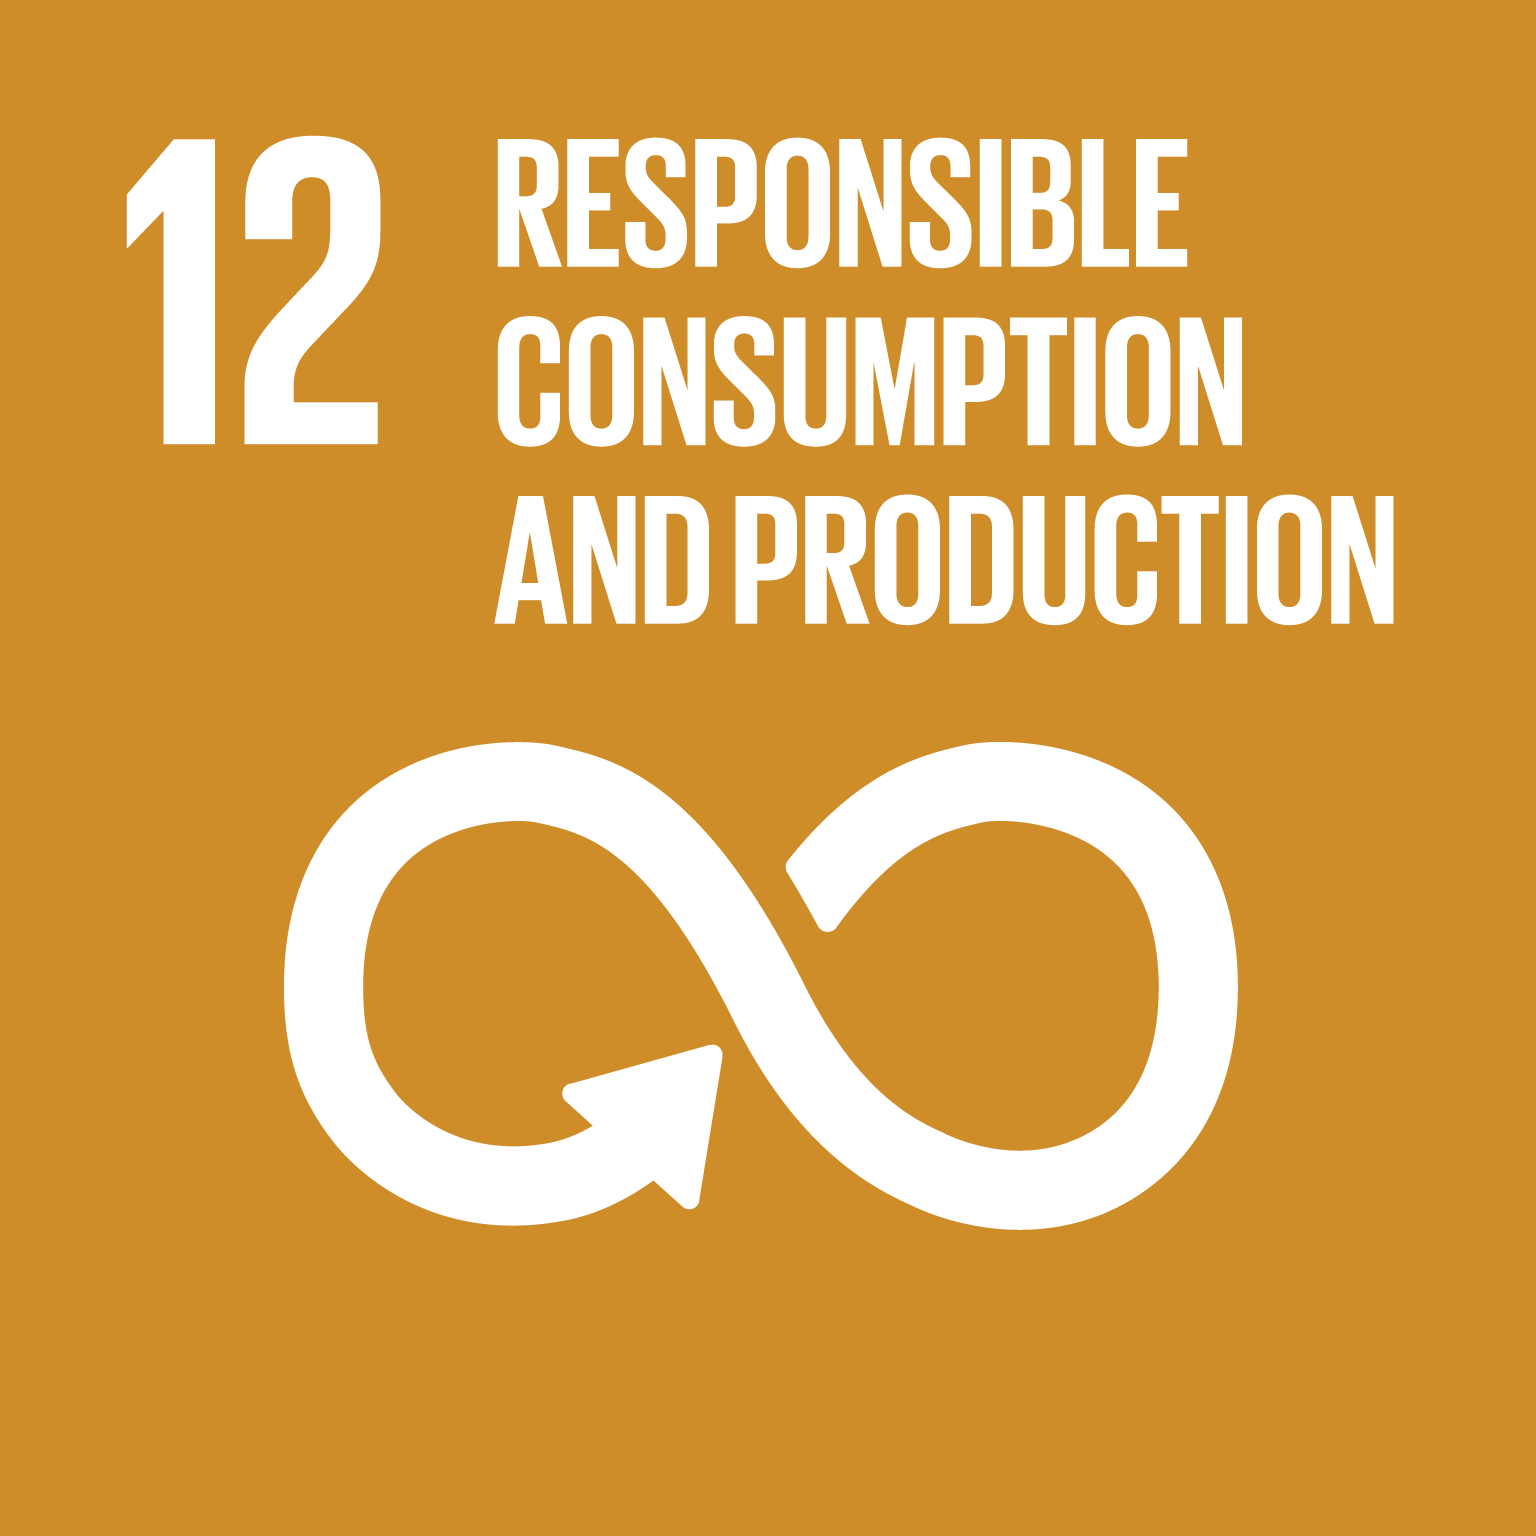 Goal 12: Responsible Consumption and Production - Ensure sustainable consumption and production patterns